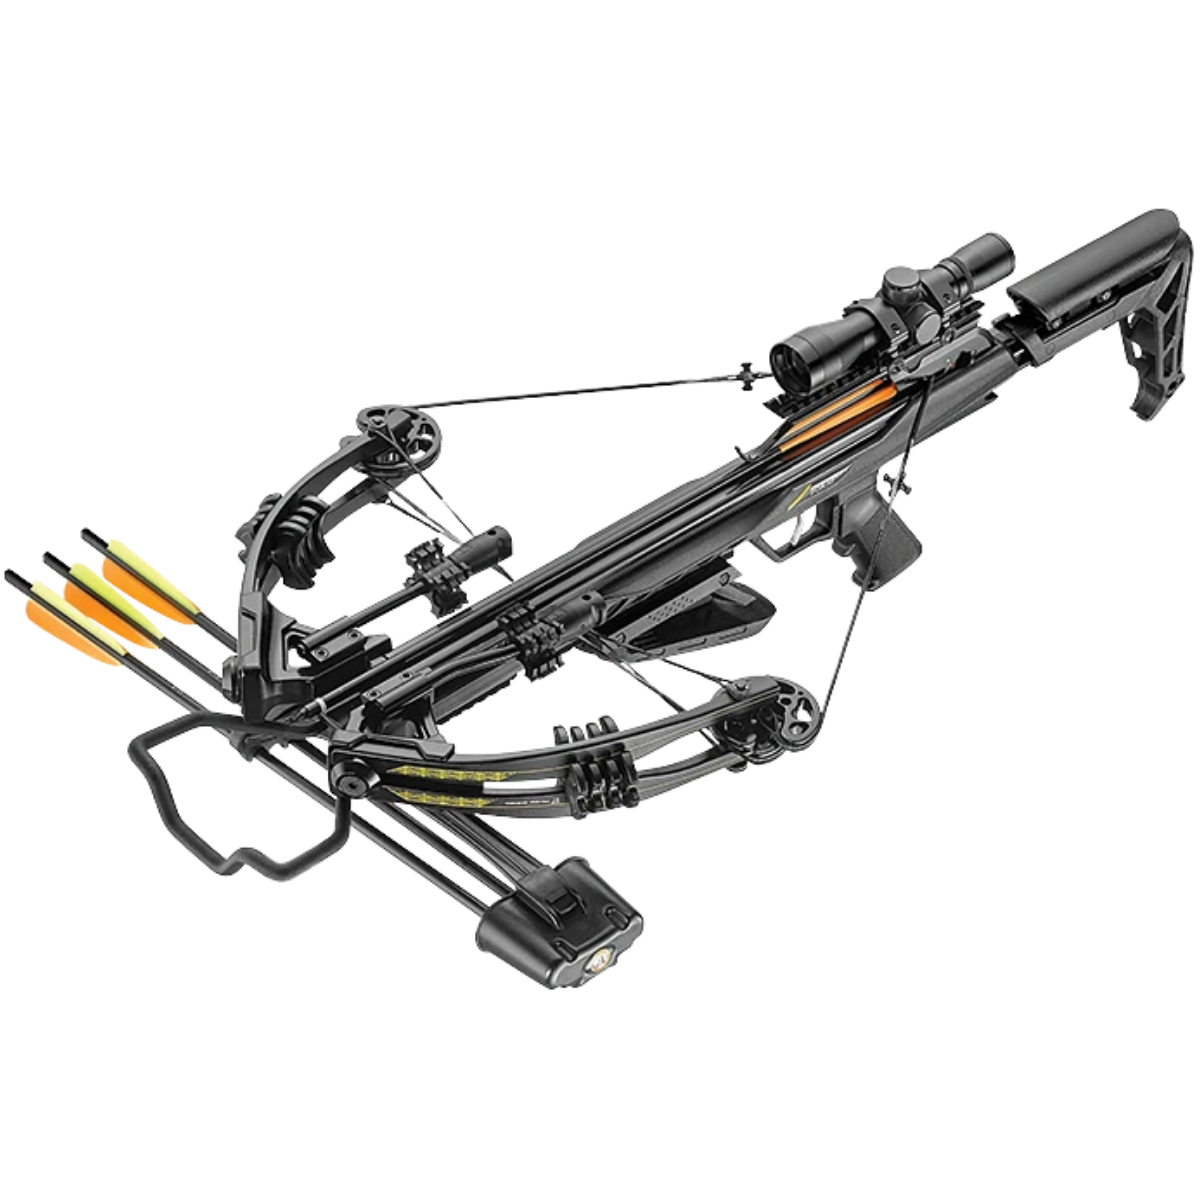 EK Archery Blade+ Compound Crossbow Package 340fps - Fast UK Shipping | Tactical Archery UK